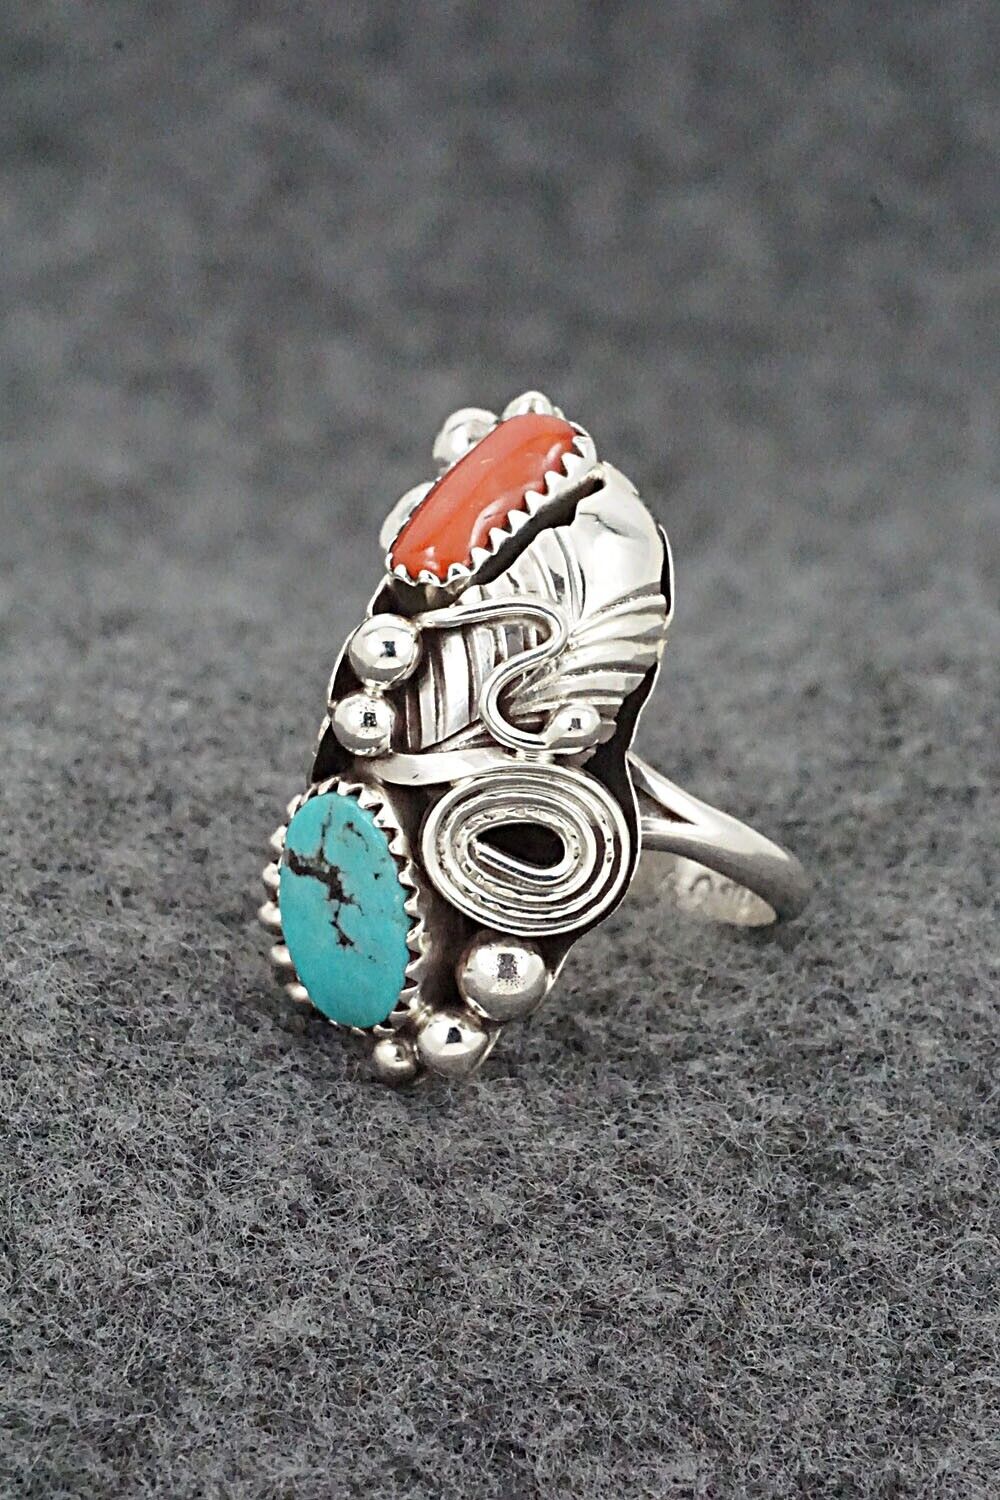 Turquoise, Coral & Sterling Silver Ring - Max Calladitto - Size 5.5